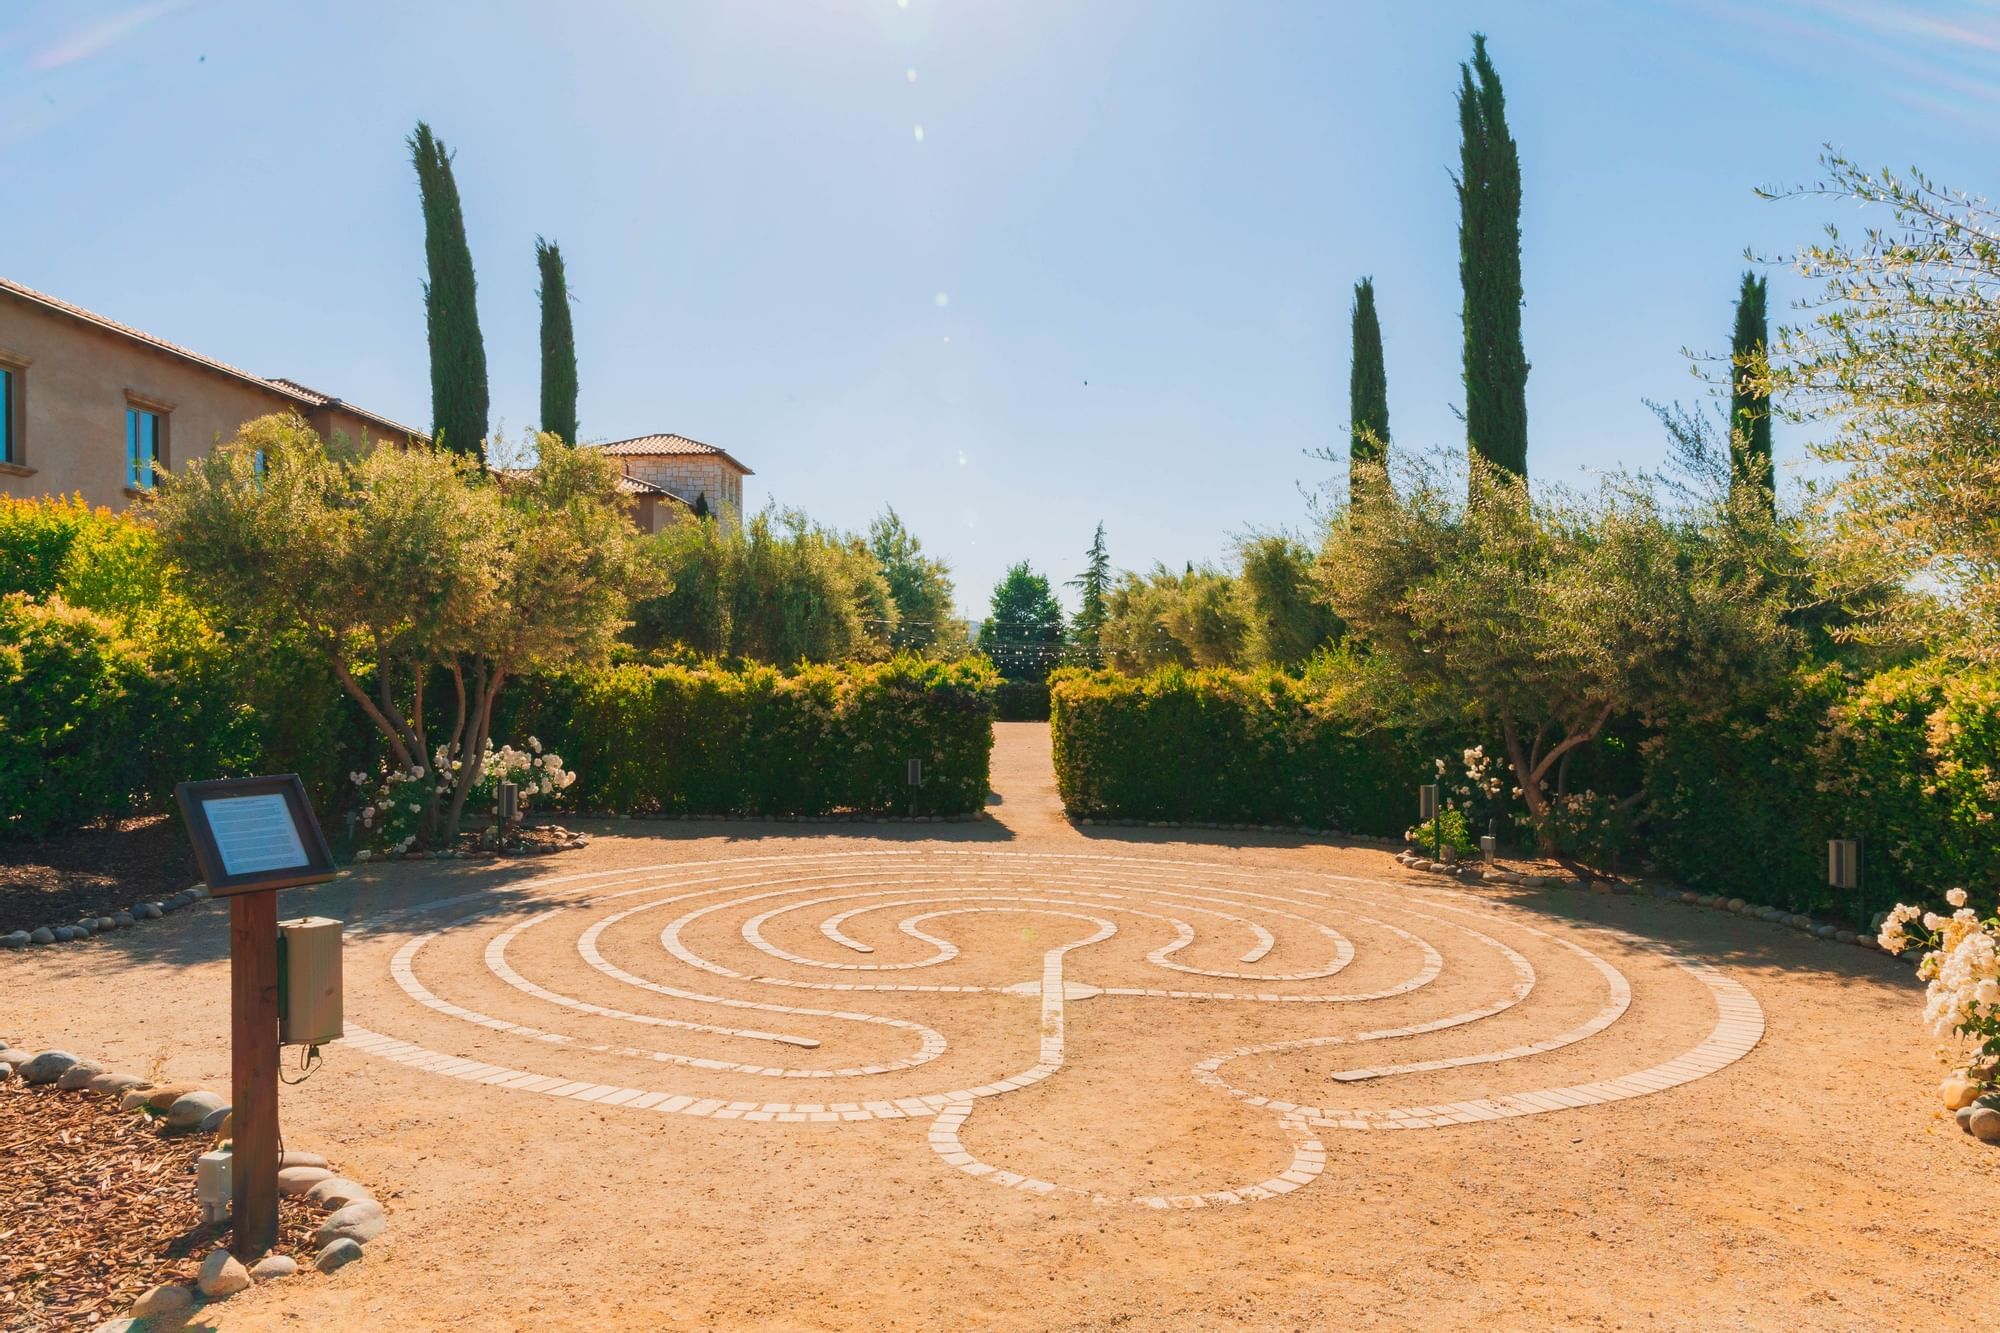 Sonic Labyrinth with stone pathway